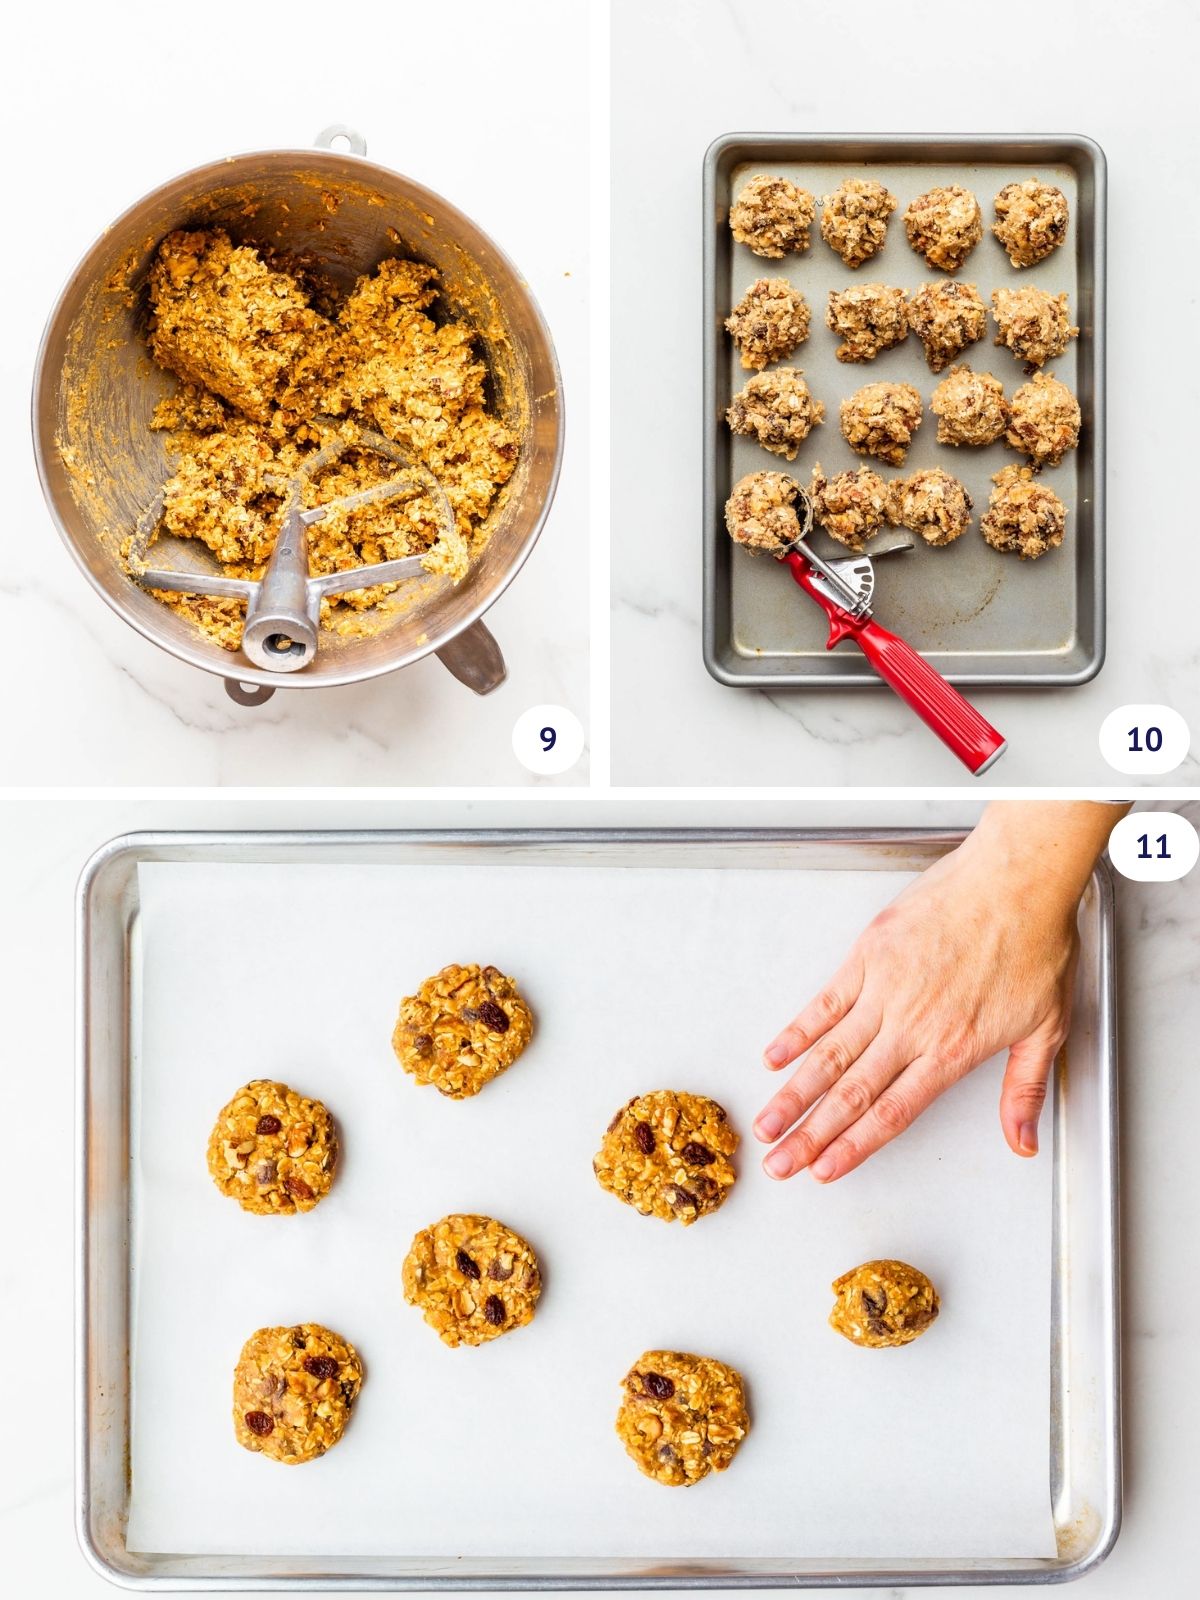 Portioning out scoops of oatmeal raisin cookie dough and then flattening them on a cookie sheet.